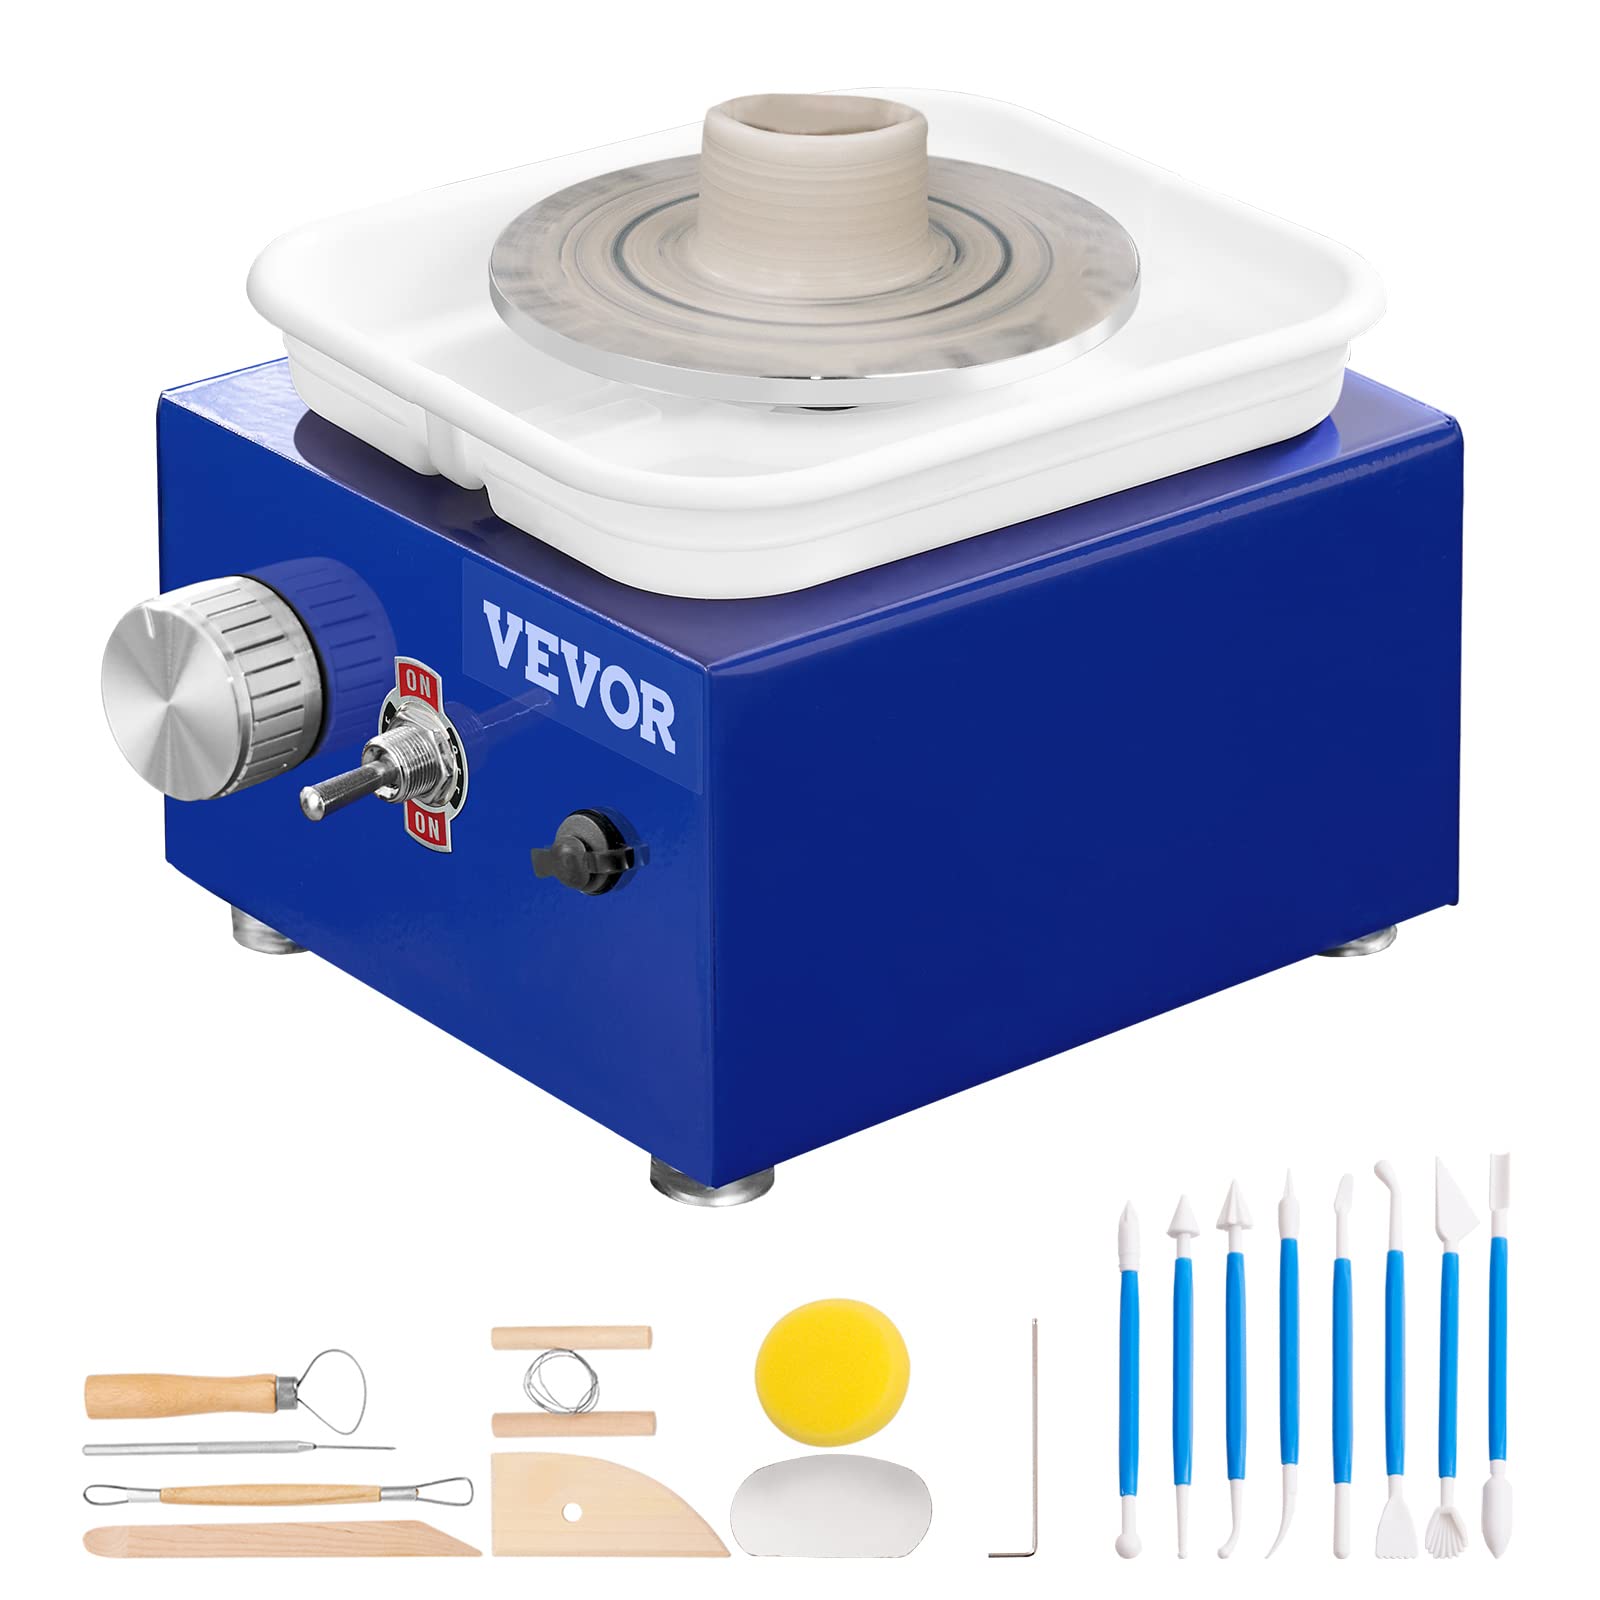 VEVOR 2 Turntables 2.6in / 3.9in Ceramic Wheel Forming Machine Adjustable 0-300RPM Speed ABS Detachable Basin, Sculpting Tools Apron Accessory Kit for Work Art Craft DIY, Blue